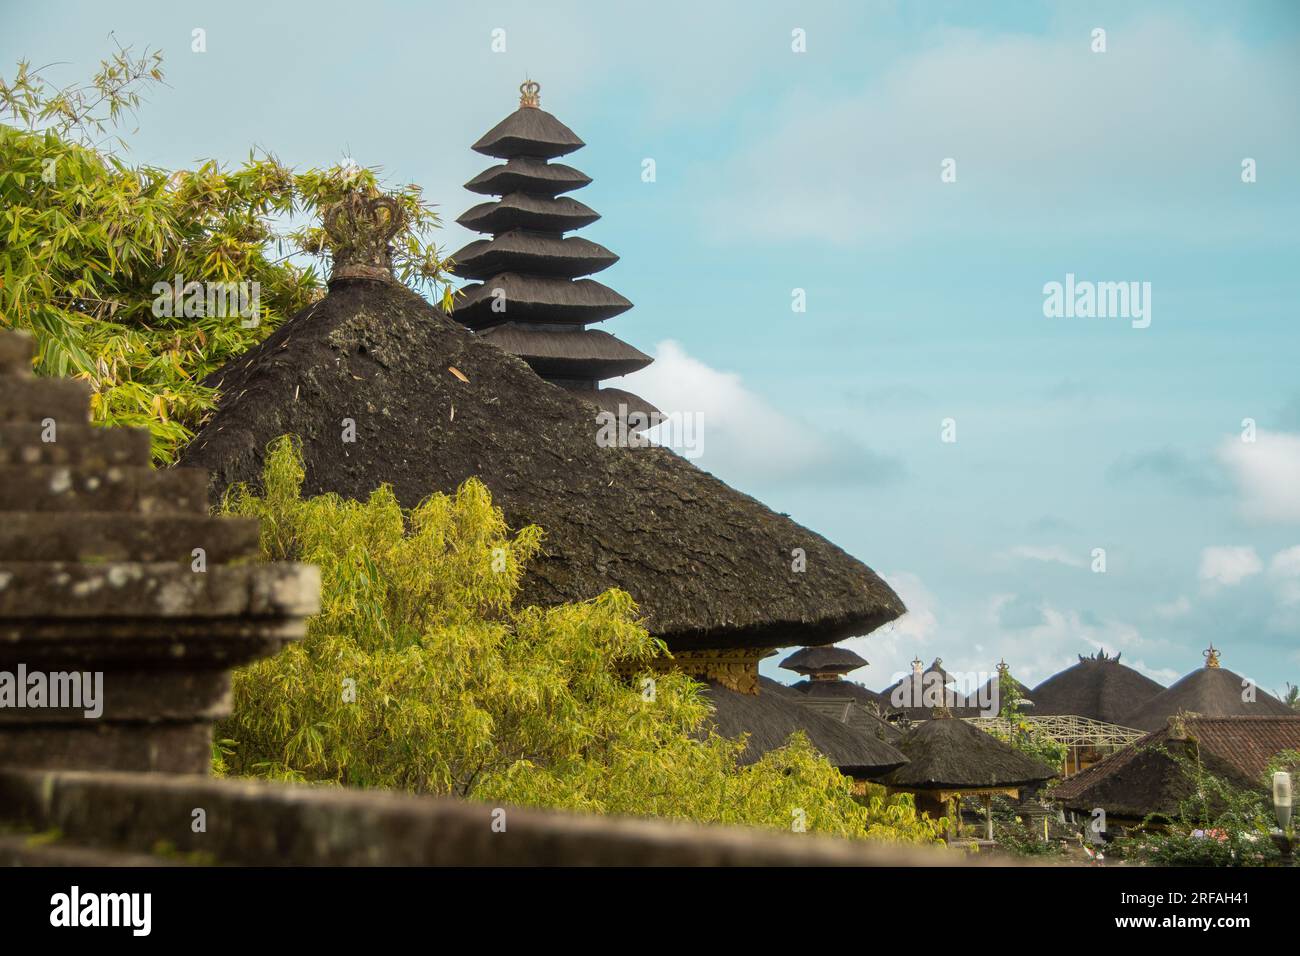 The view over the roofs of Balinese shrines in the 'Pura Besakih' temple Stock Photo